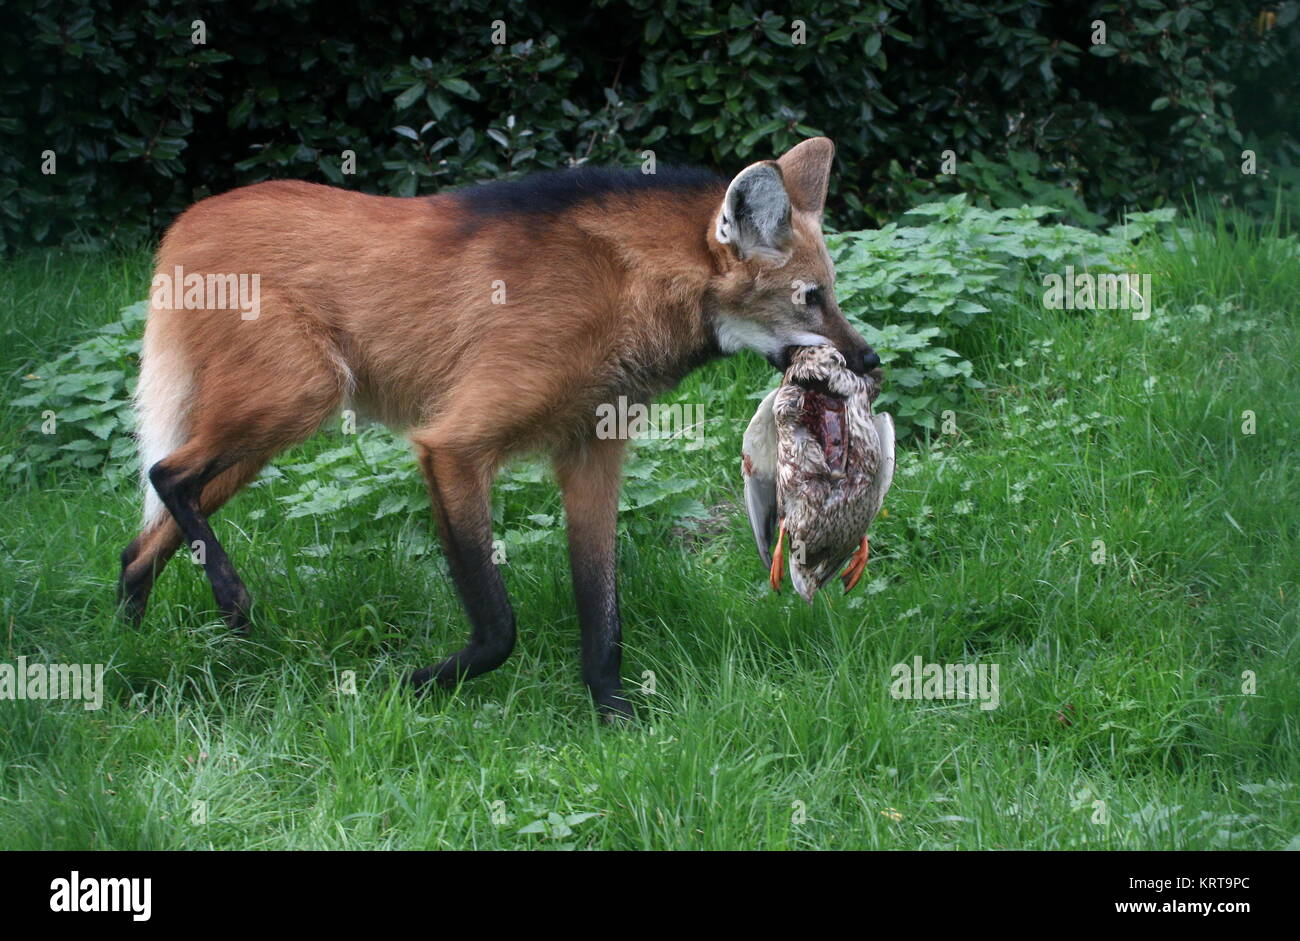 South American Maned wolf (Chrysocyon brachyurus) with prey in his jaws Stock Photo